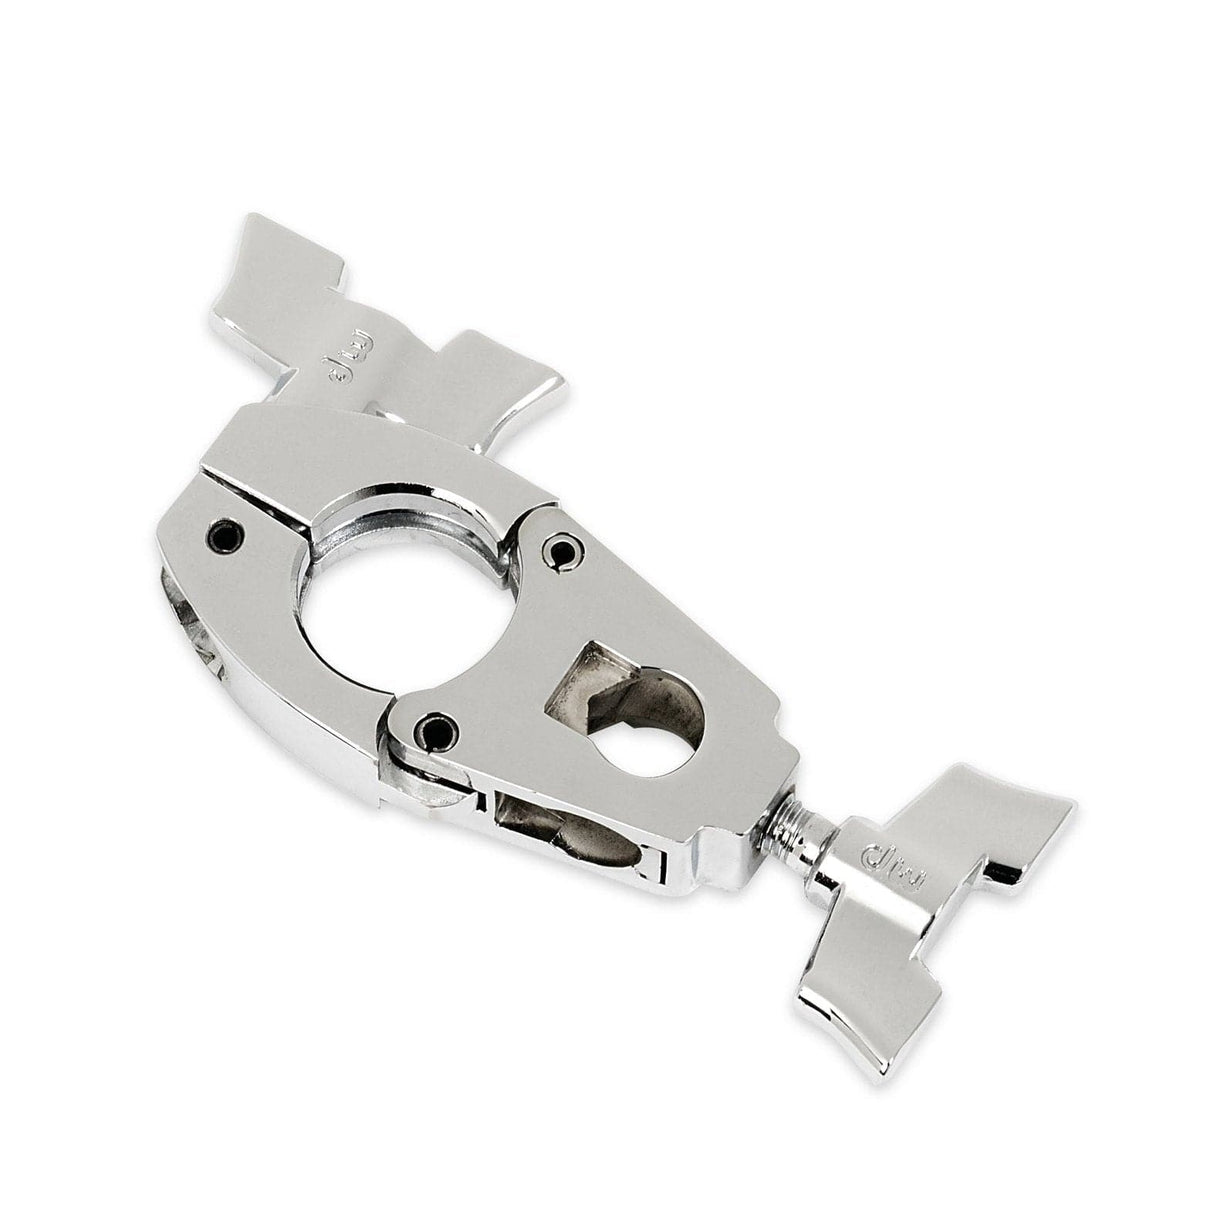 DW DWSM797 Dog Biscuit Clamp with 1/2-Inch to 9.5mm L-Arm